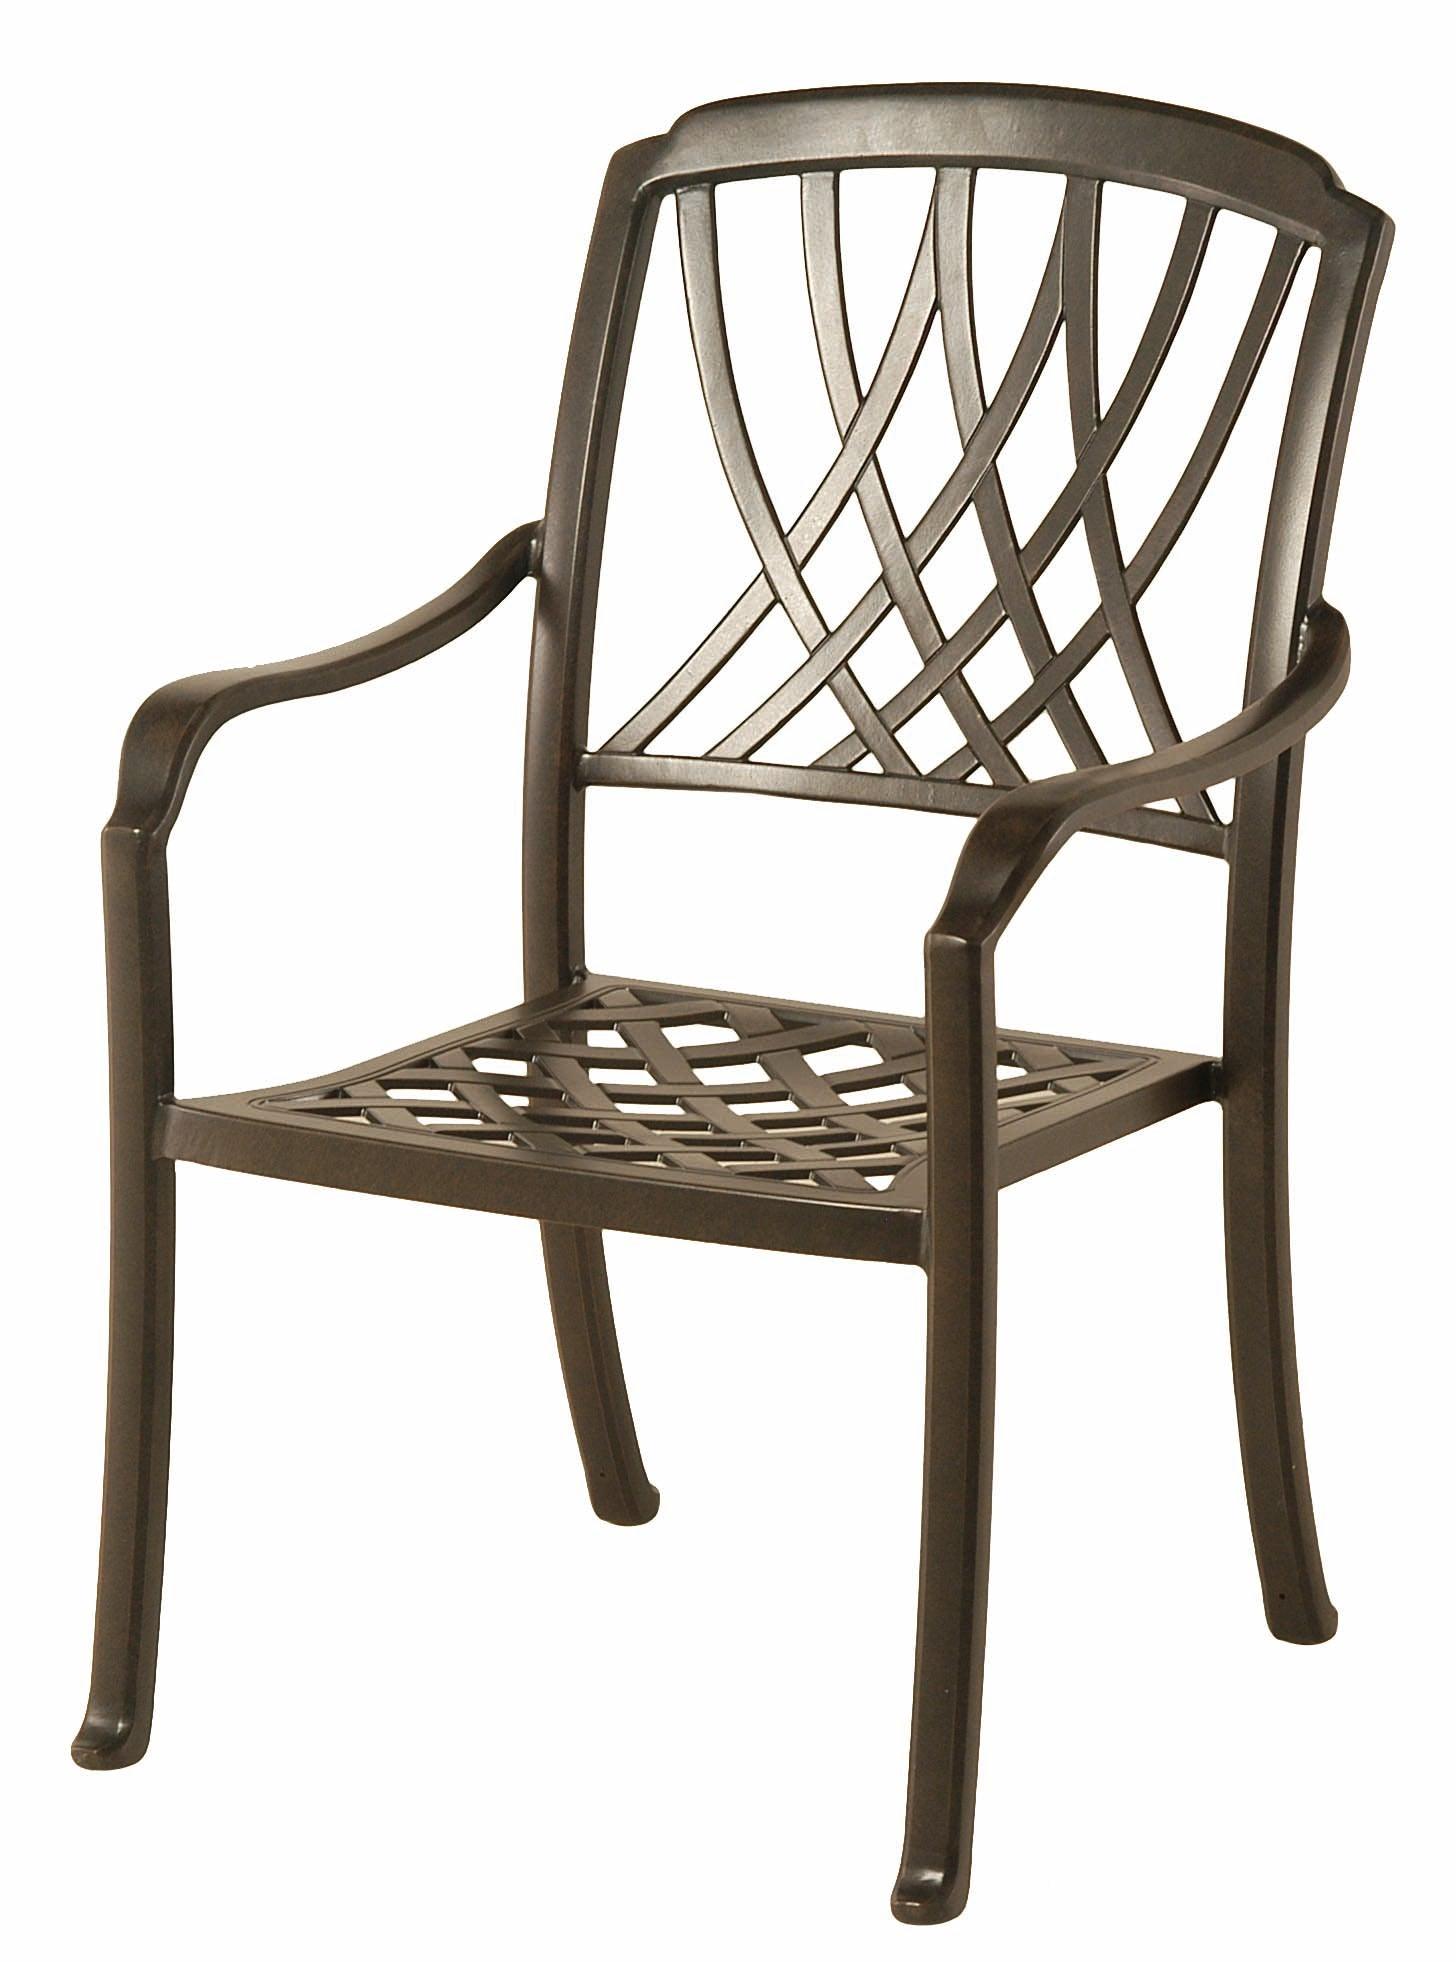 With an elegant, interwinding back design and stunning arm rest details, this chair is designed for maximum support and beautiful aesthetics. With a bold dark finish, this chair adds complexity and intricacy into any outdoor living space. 